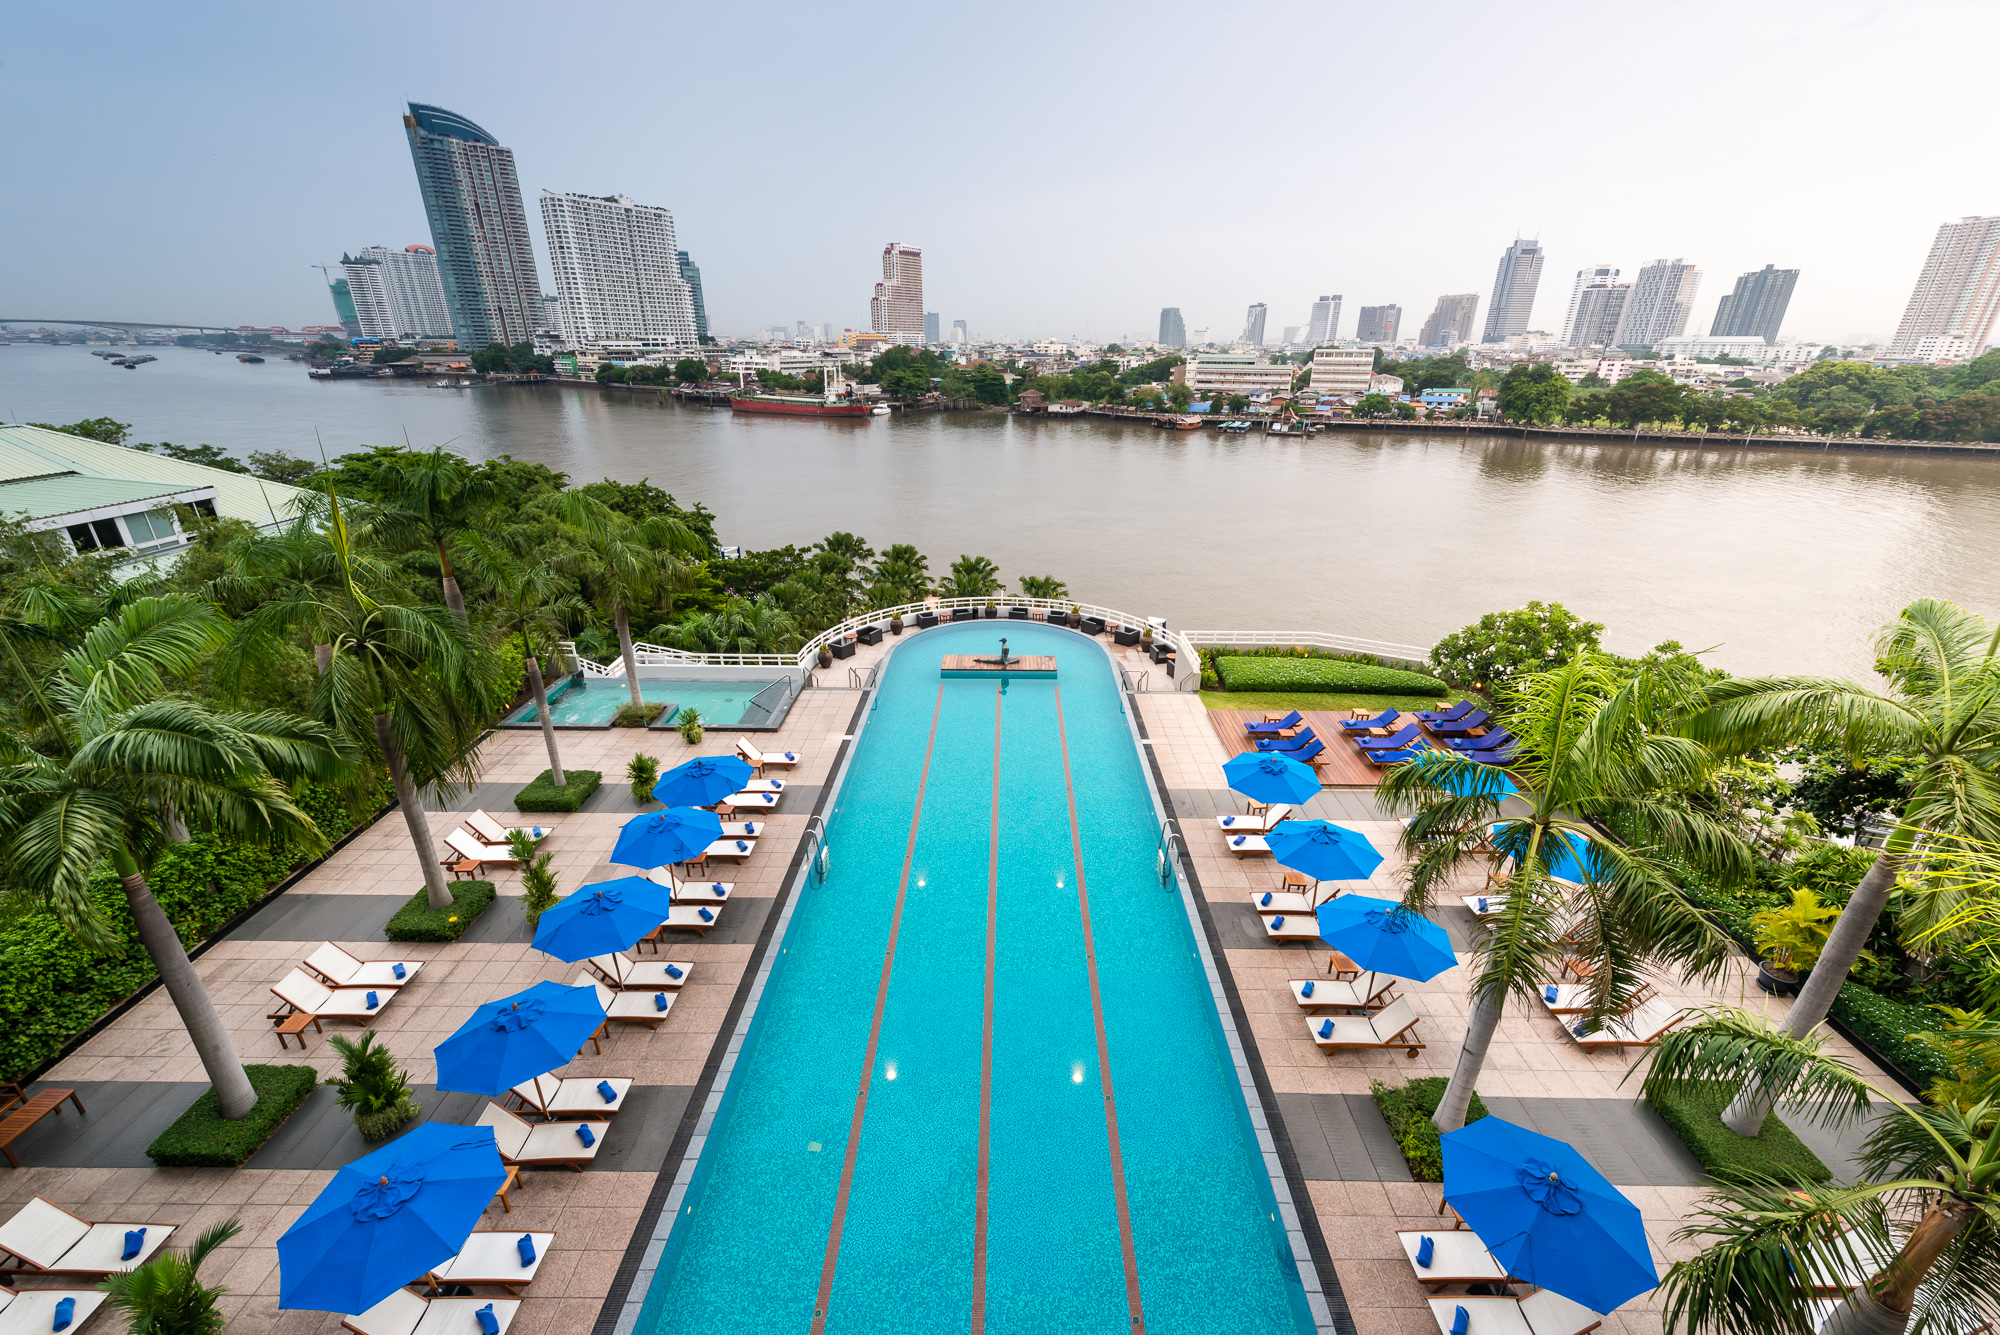 Chatrium Hotel Riverside Bangkok Awarded “top 10 Loved By Guests” Chatrium Hotels And Residences